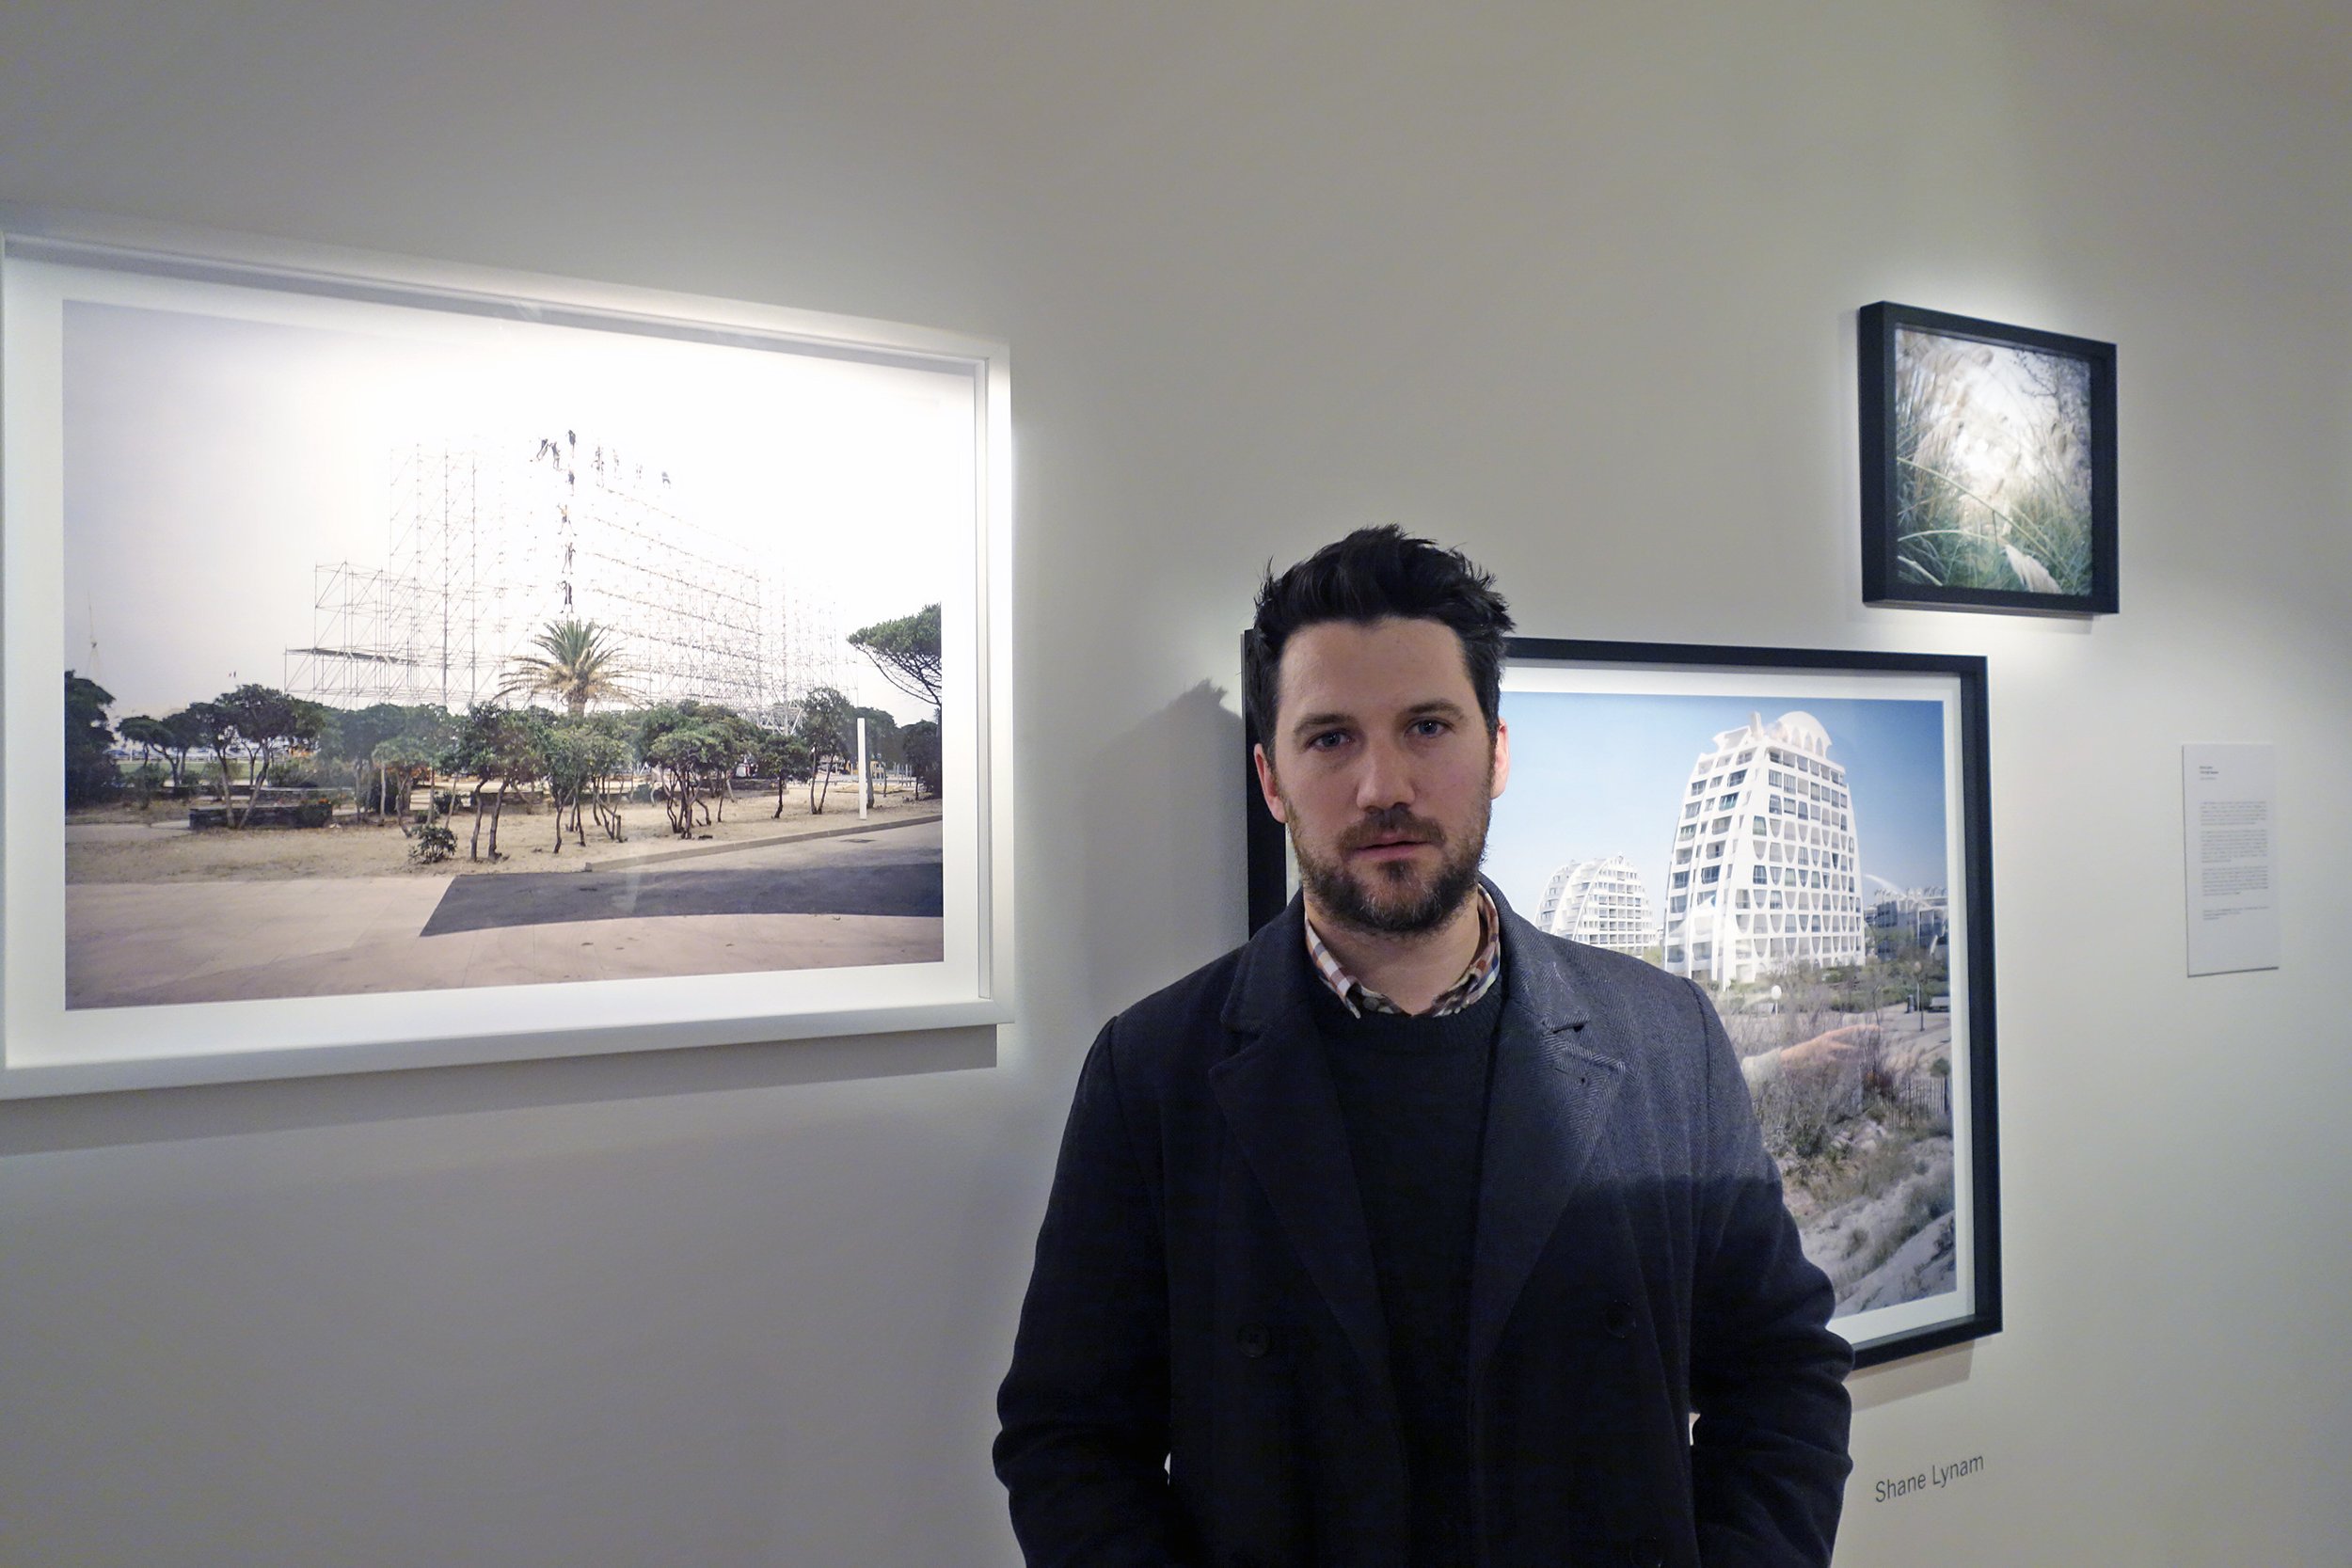  Photographer Shane Lynam with his work 